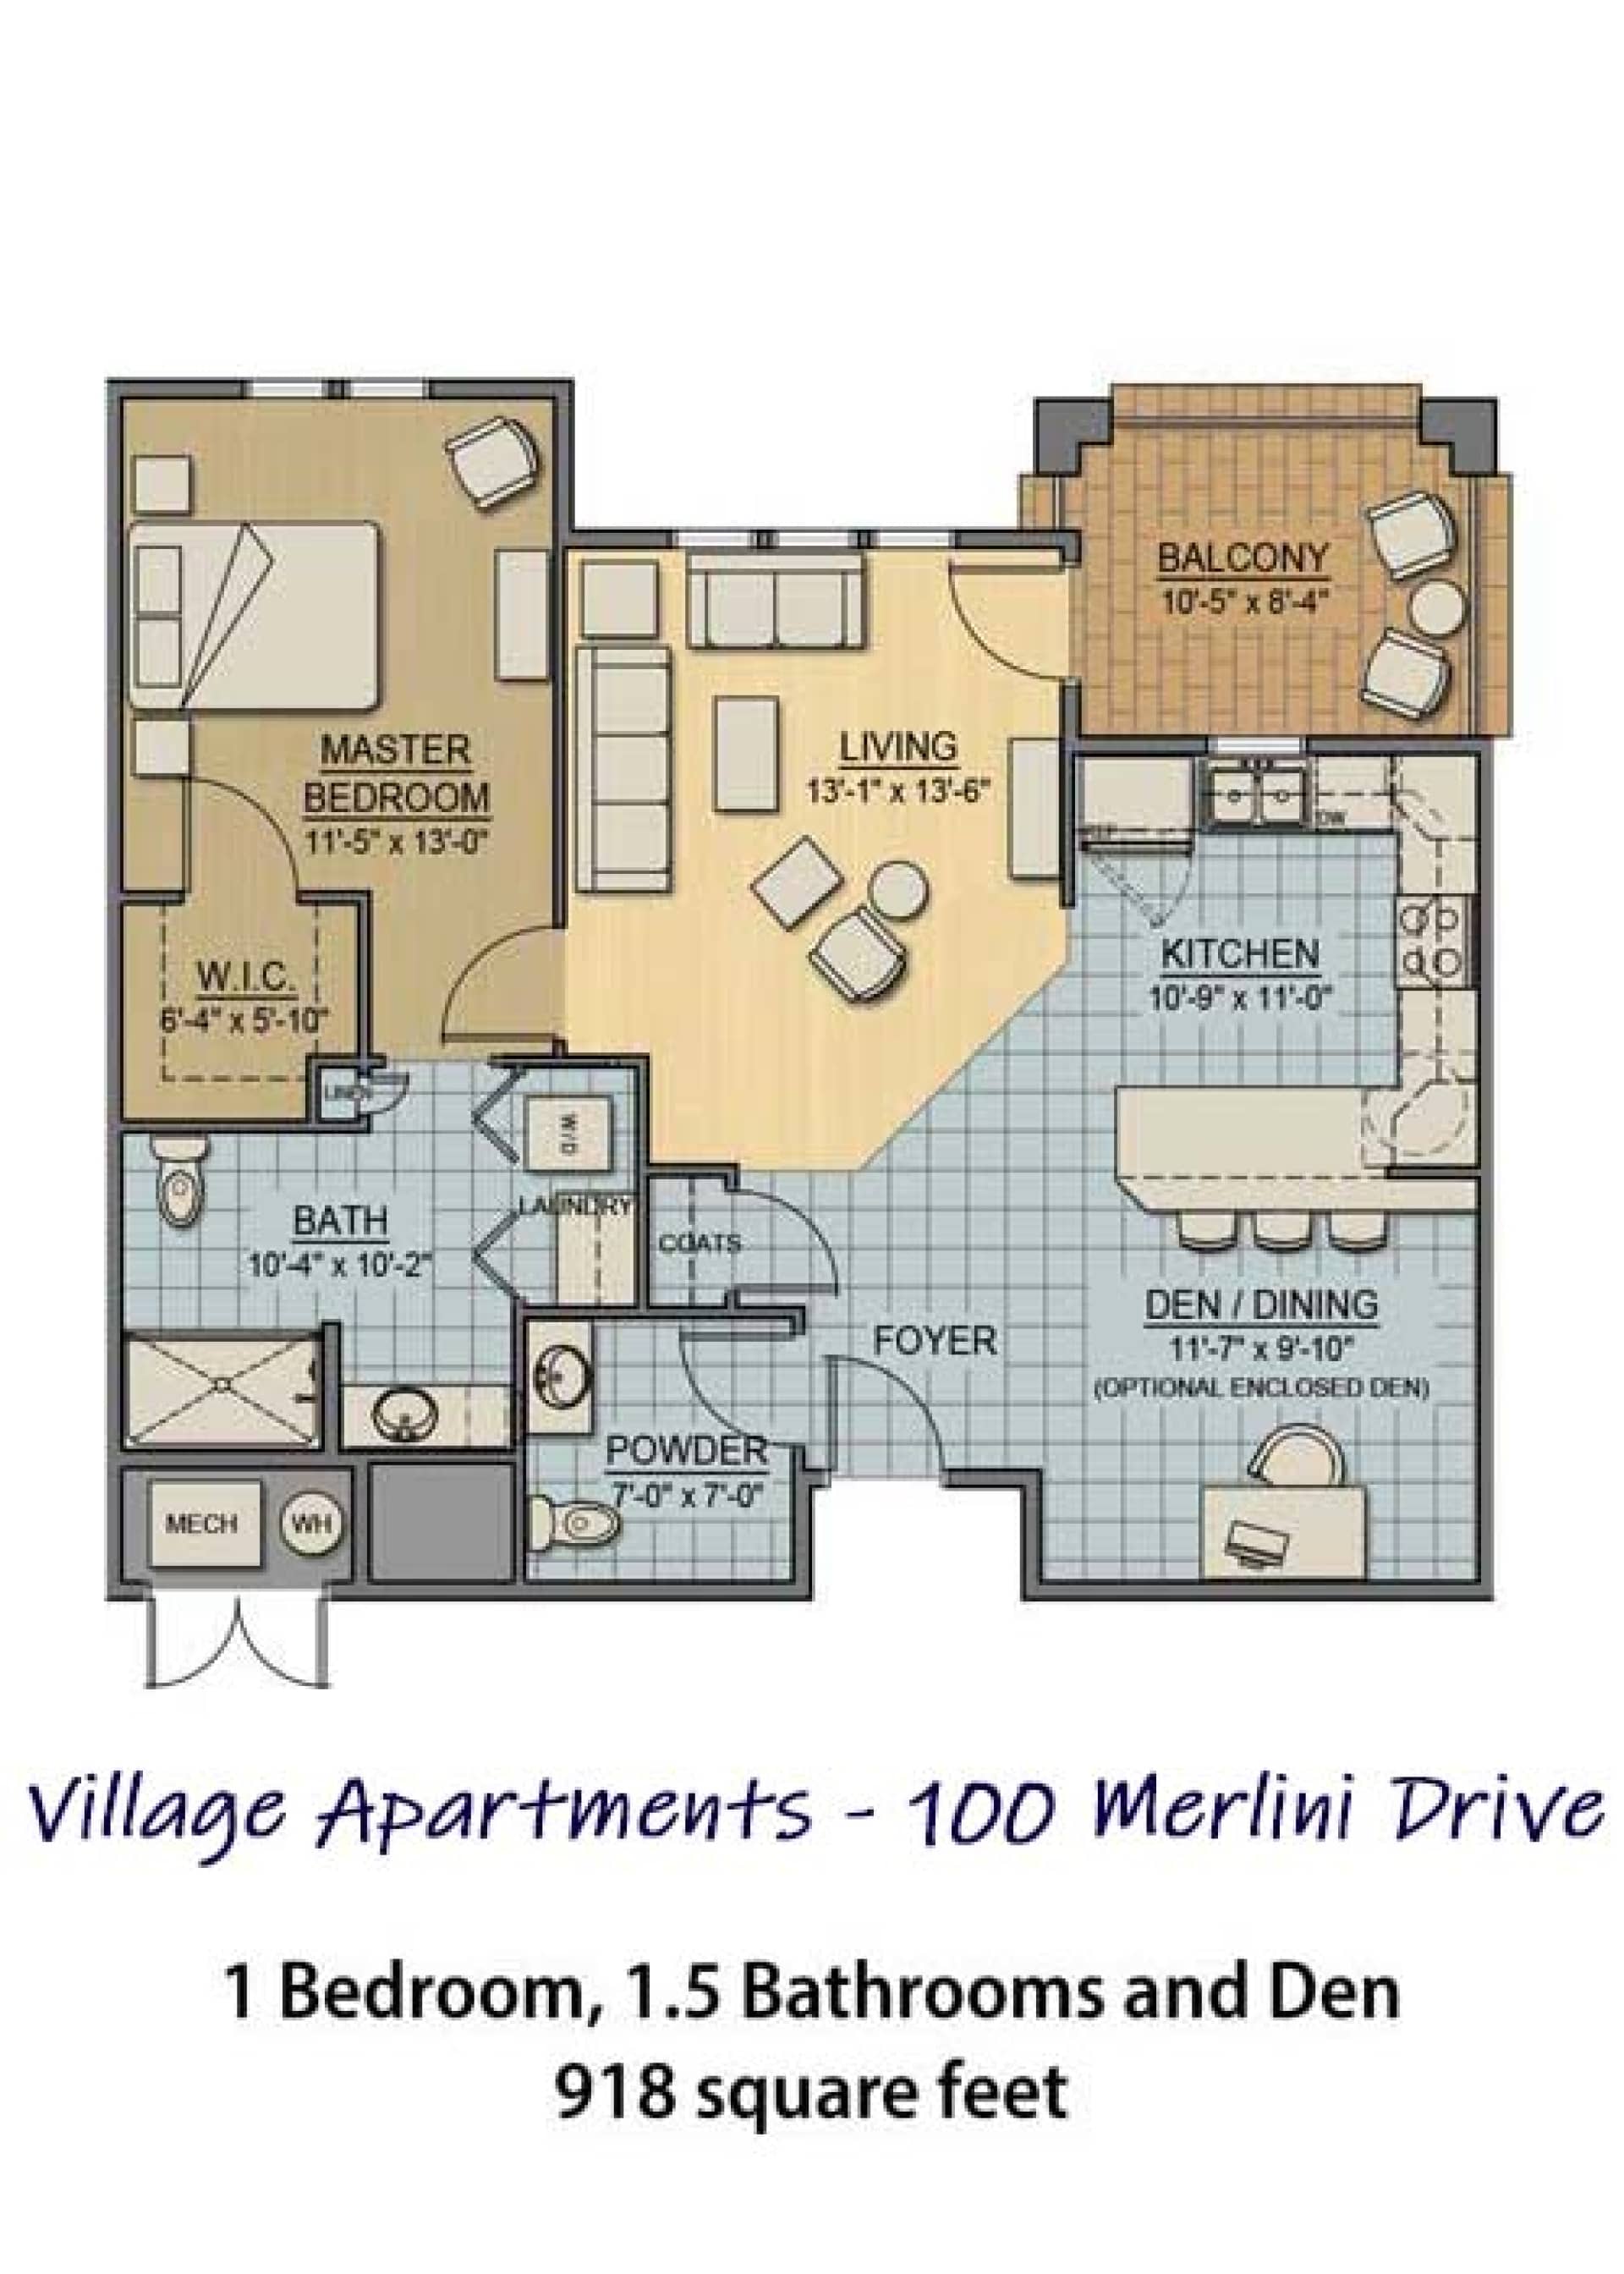 100 Merlini floorplan for 918 sq ft apartment with 1BR 1.5BA